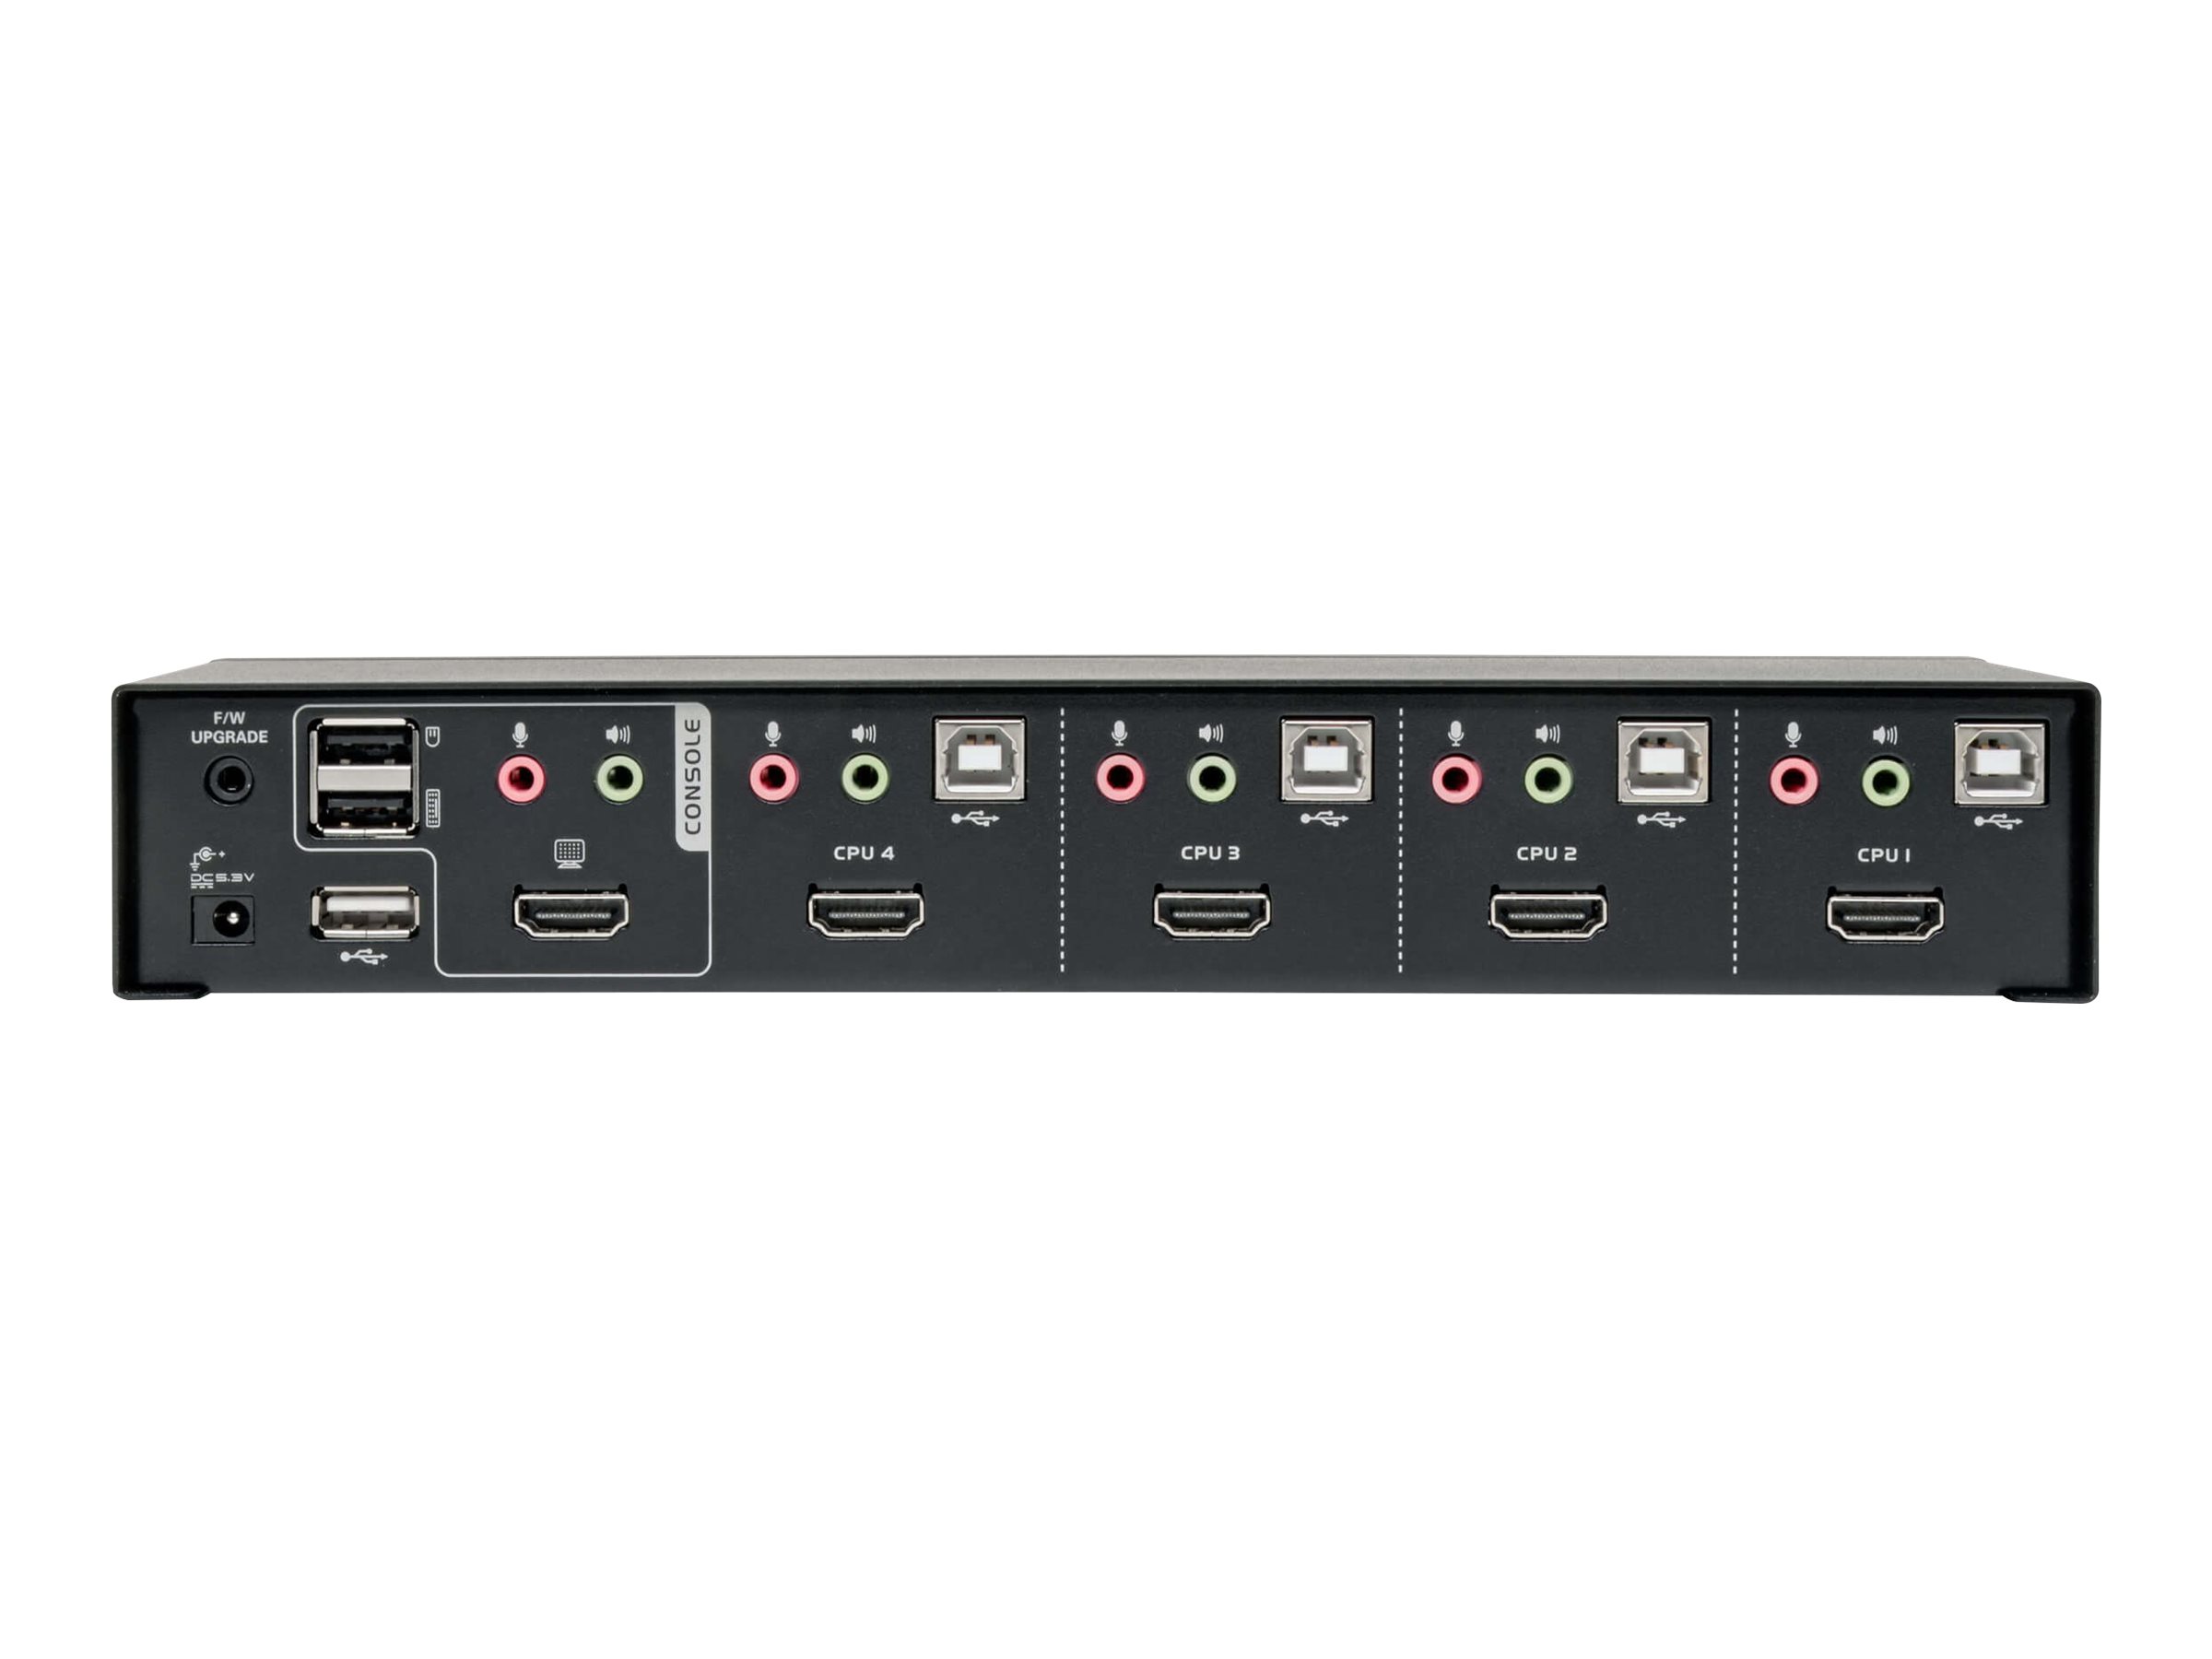 Lite 4-Port HDMI/USB KVM Switch with Audio/Video and Peripheral Sharing | www.shidirect.com